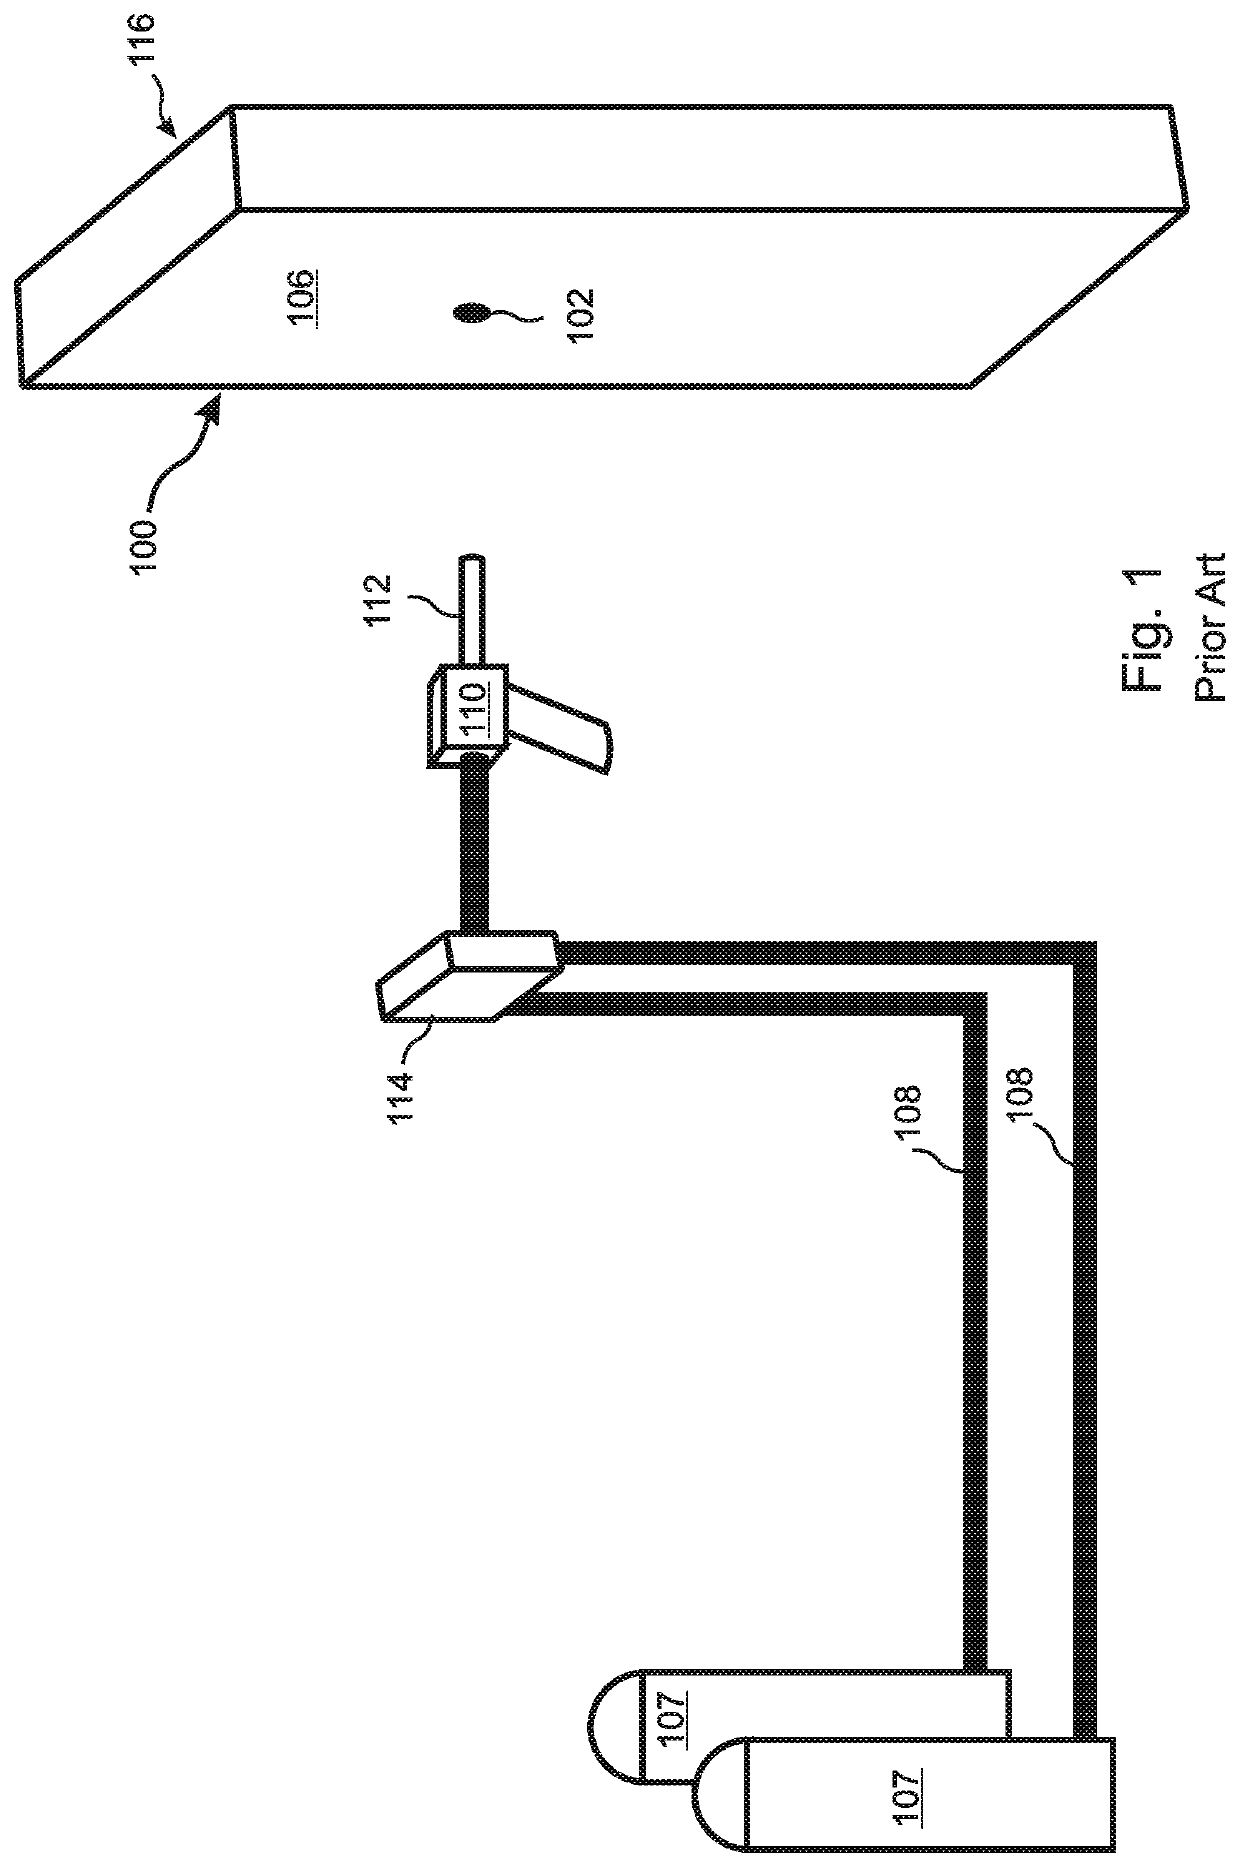 Insulation injection device